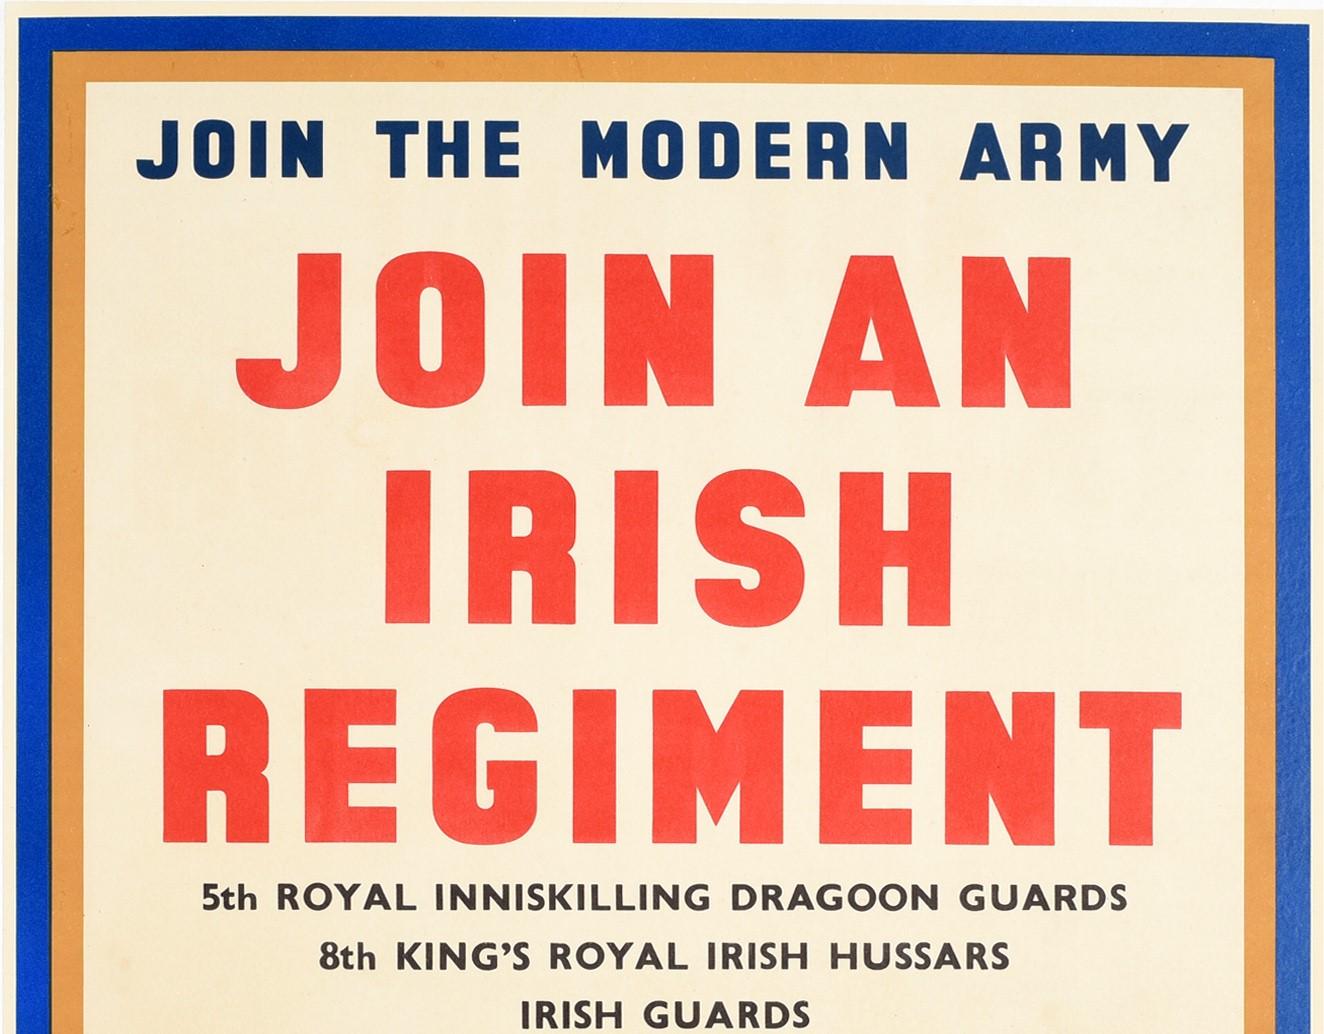 Original Vintage Poster Join The Modern Army Irish Regiment Military Recruitment - Print by Unknown